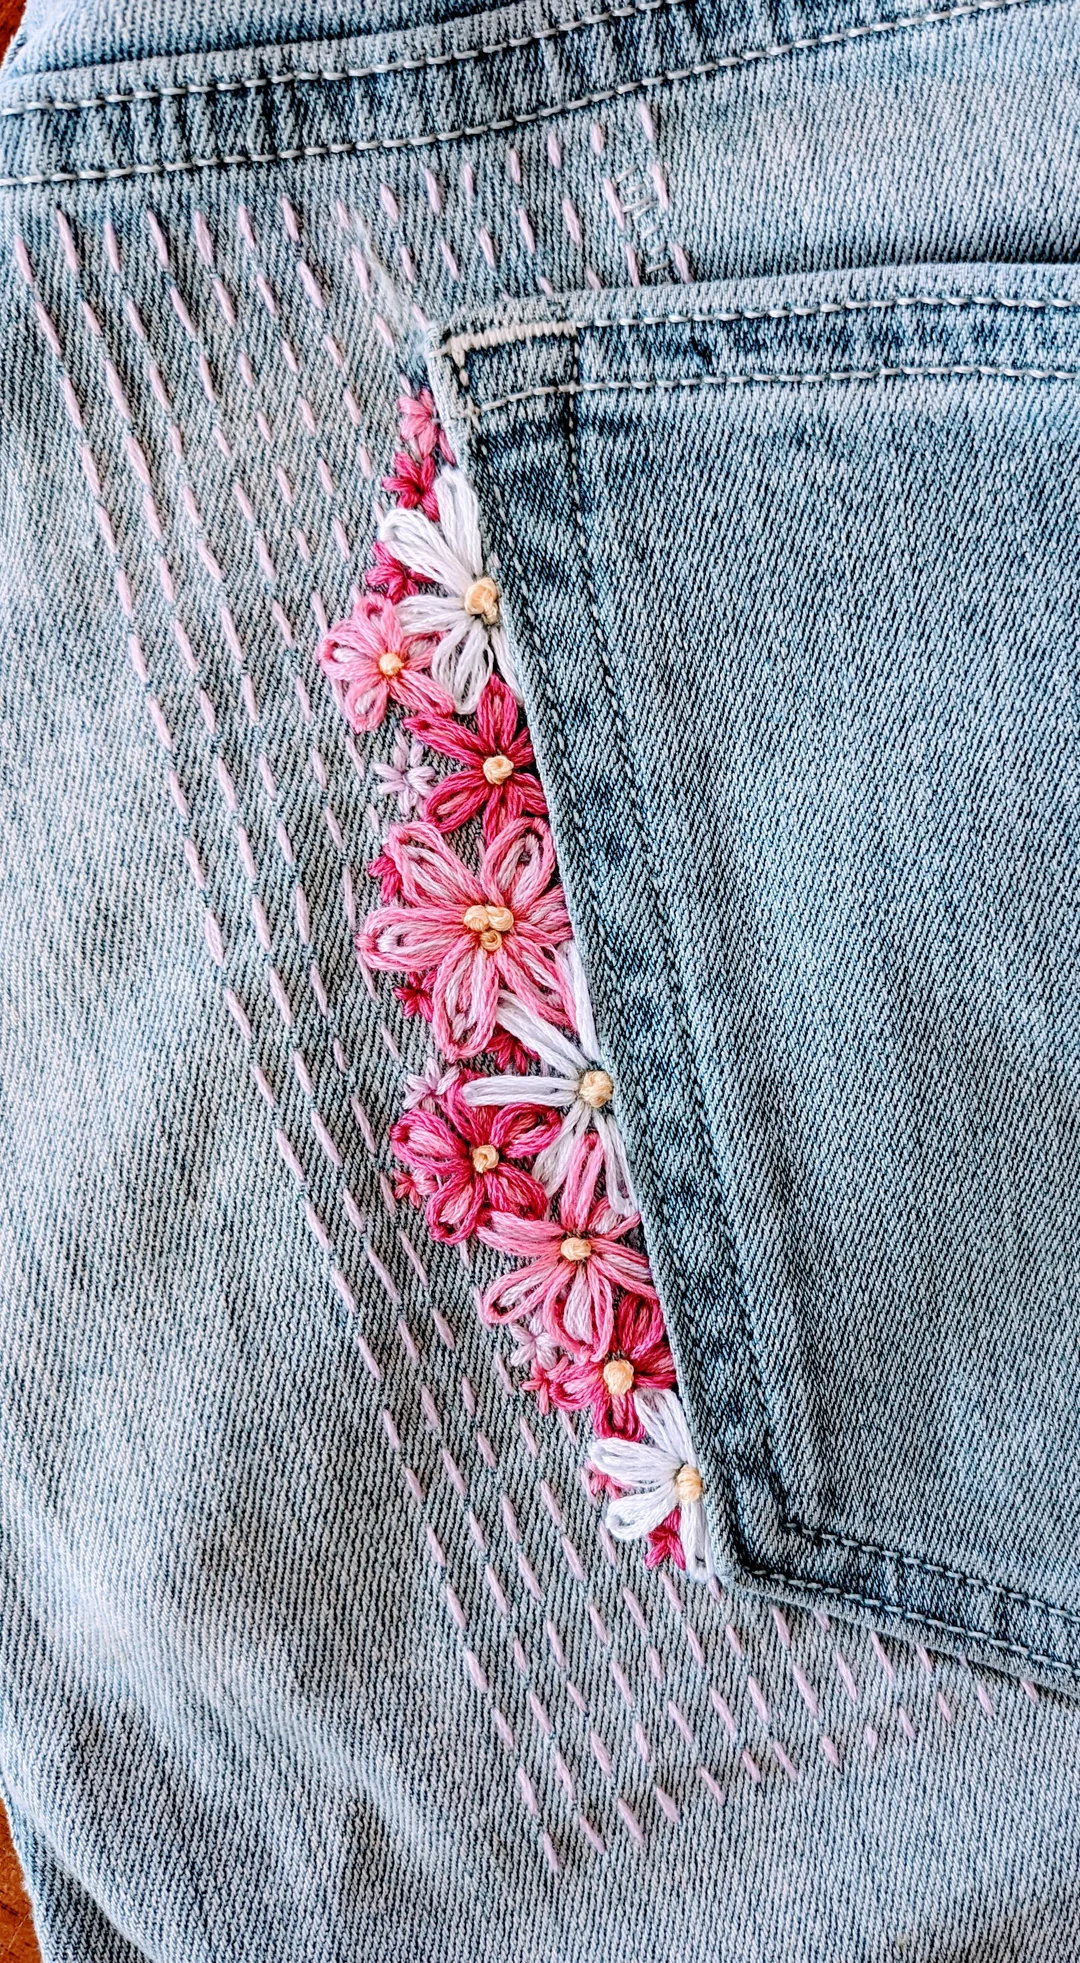 Discover 16 creative ways to patch and mend your jeans with denim embroidery and visible mending